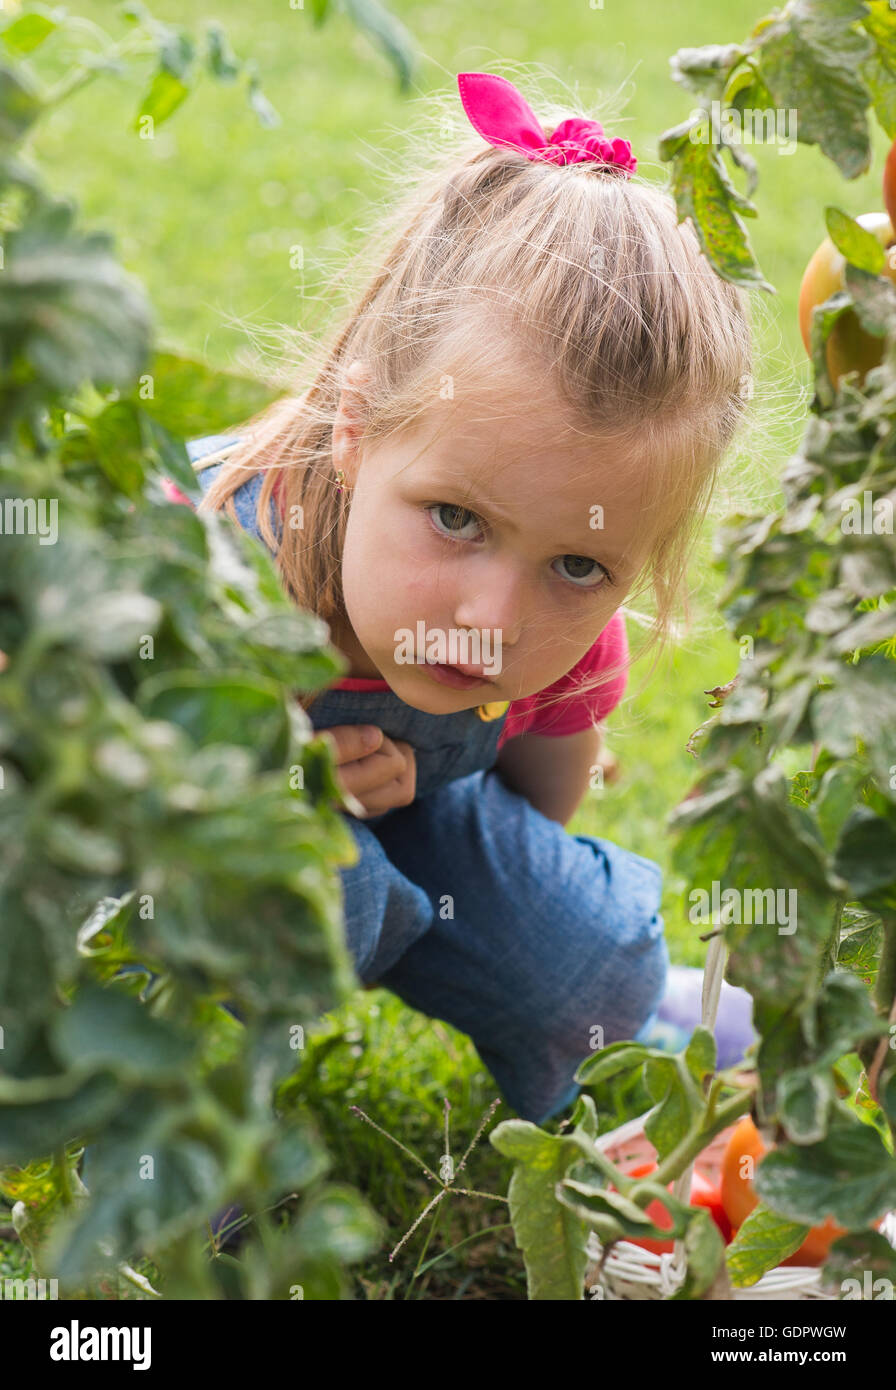 Adorable little girl collecting crop tomatoes in garden Stock Photo - Alamy